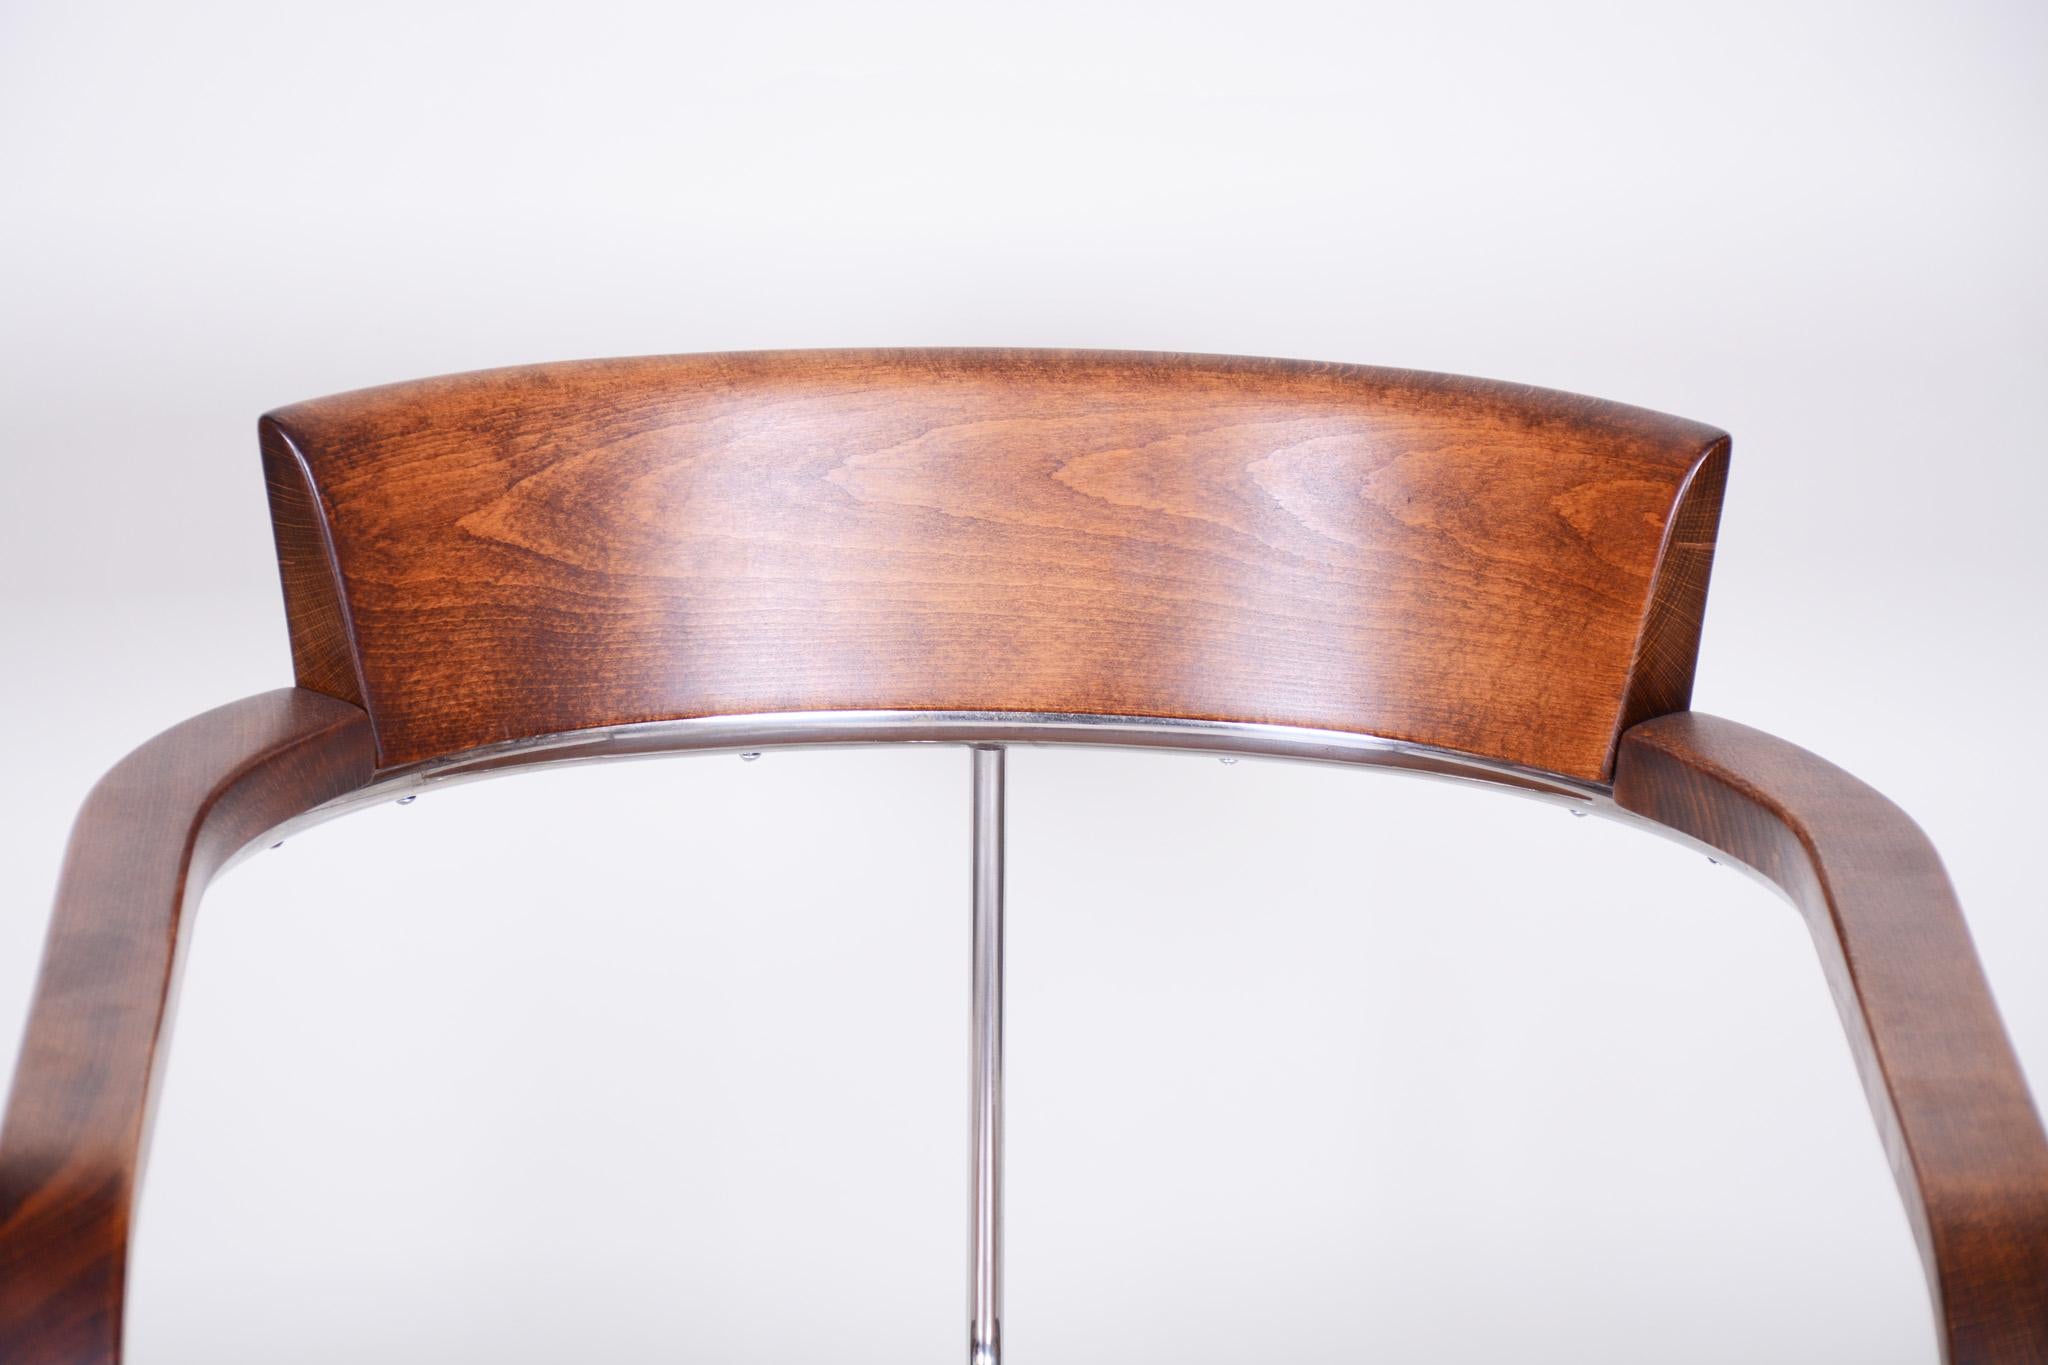 Czech Art Deco chair
Material: Walnut and beech
Period: 1930-1939
Perfect original condition,
Made by architect Jindrich Halabala in United Arts & Crafts manufacture in Brno.